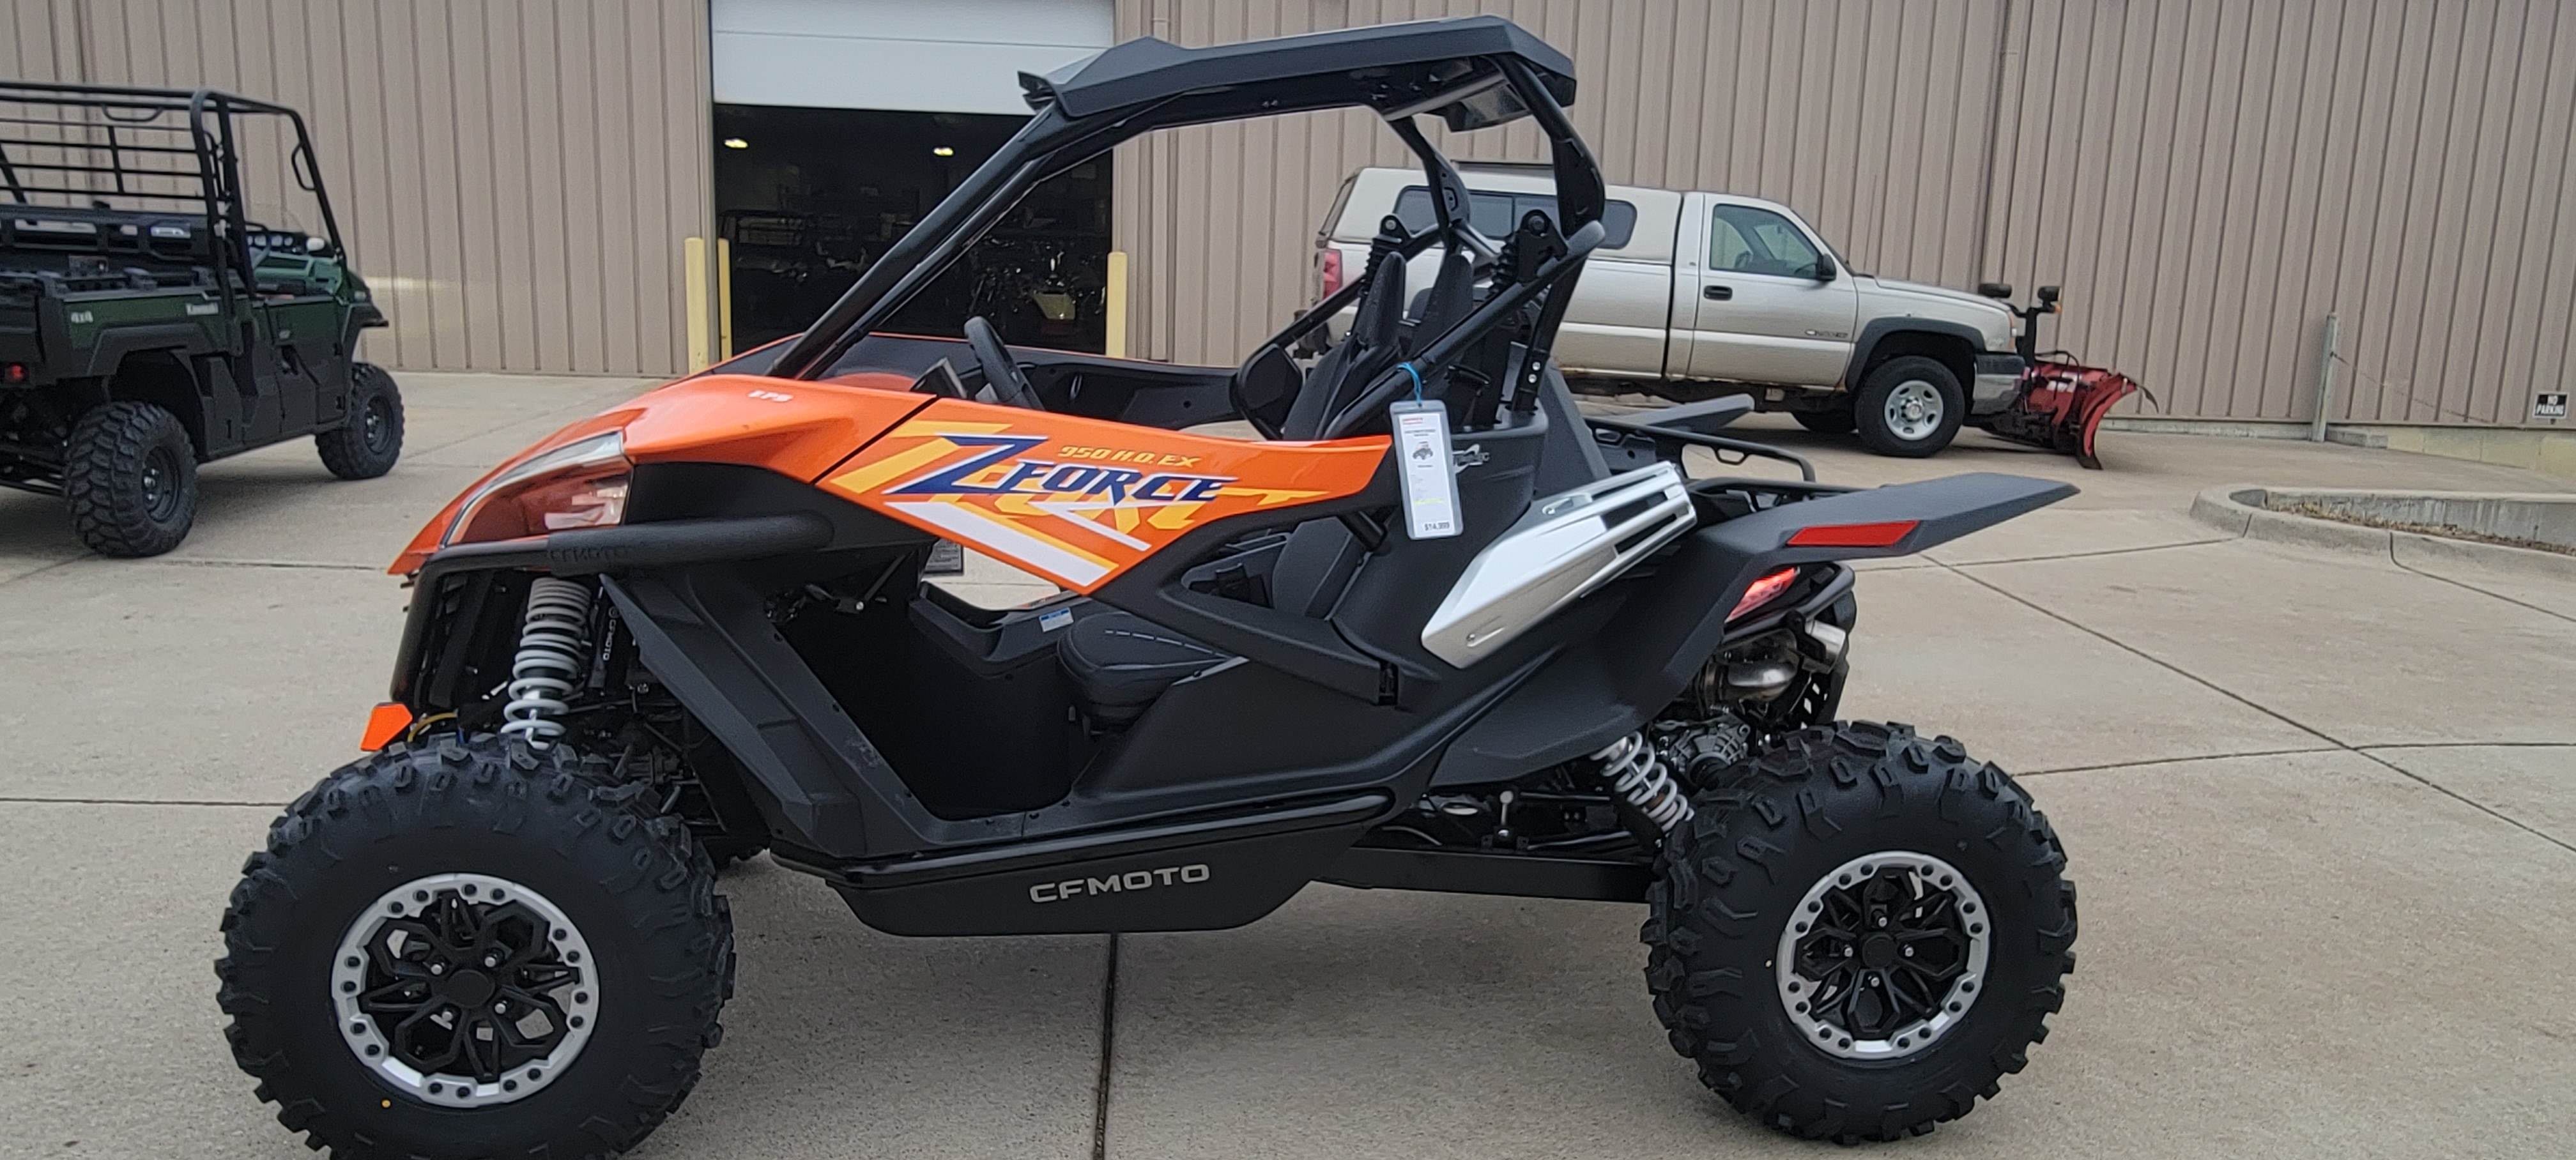 2022 CFMOTO ZFORCE 950 HO EX at Brenny's Motorcycle Clinic, Bettendorf, IA 52722